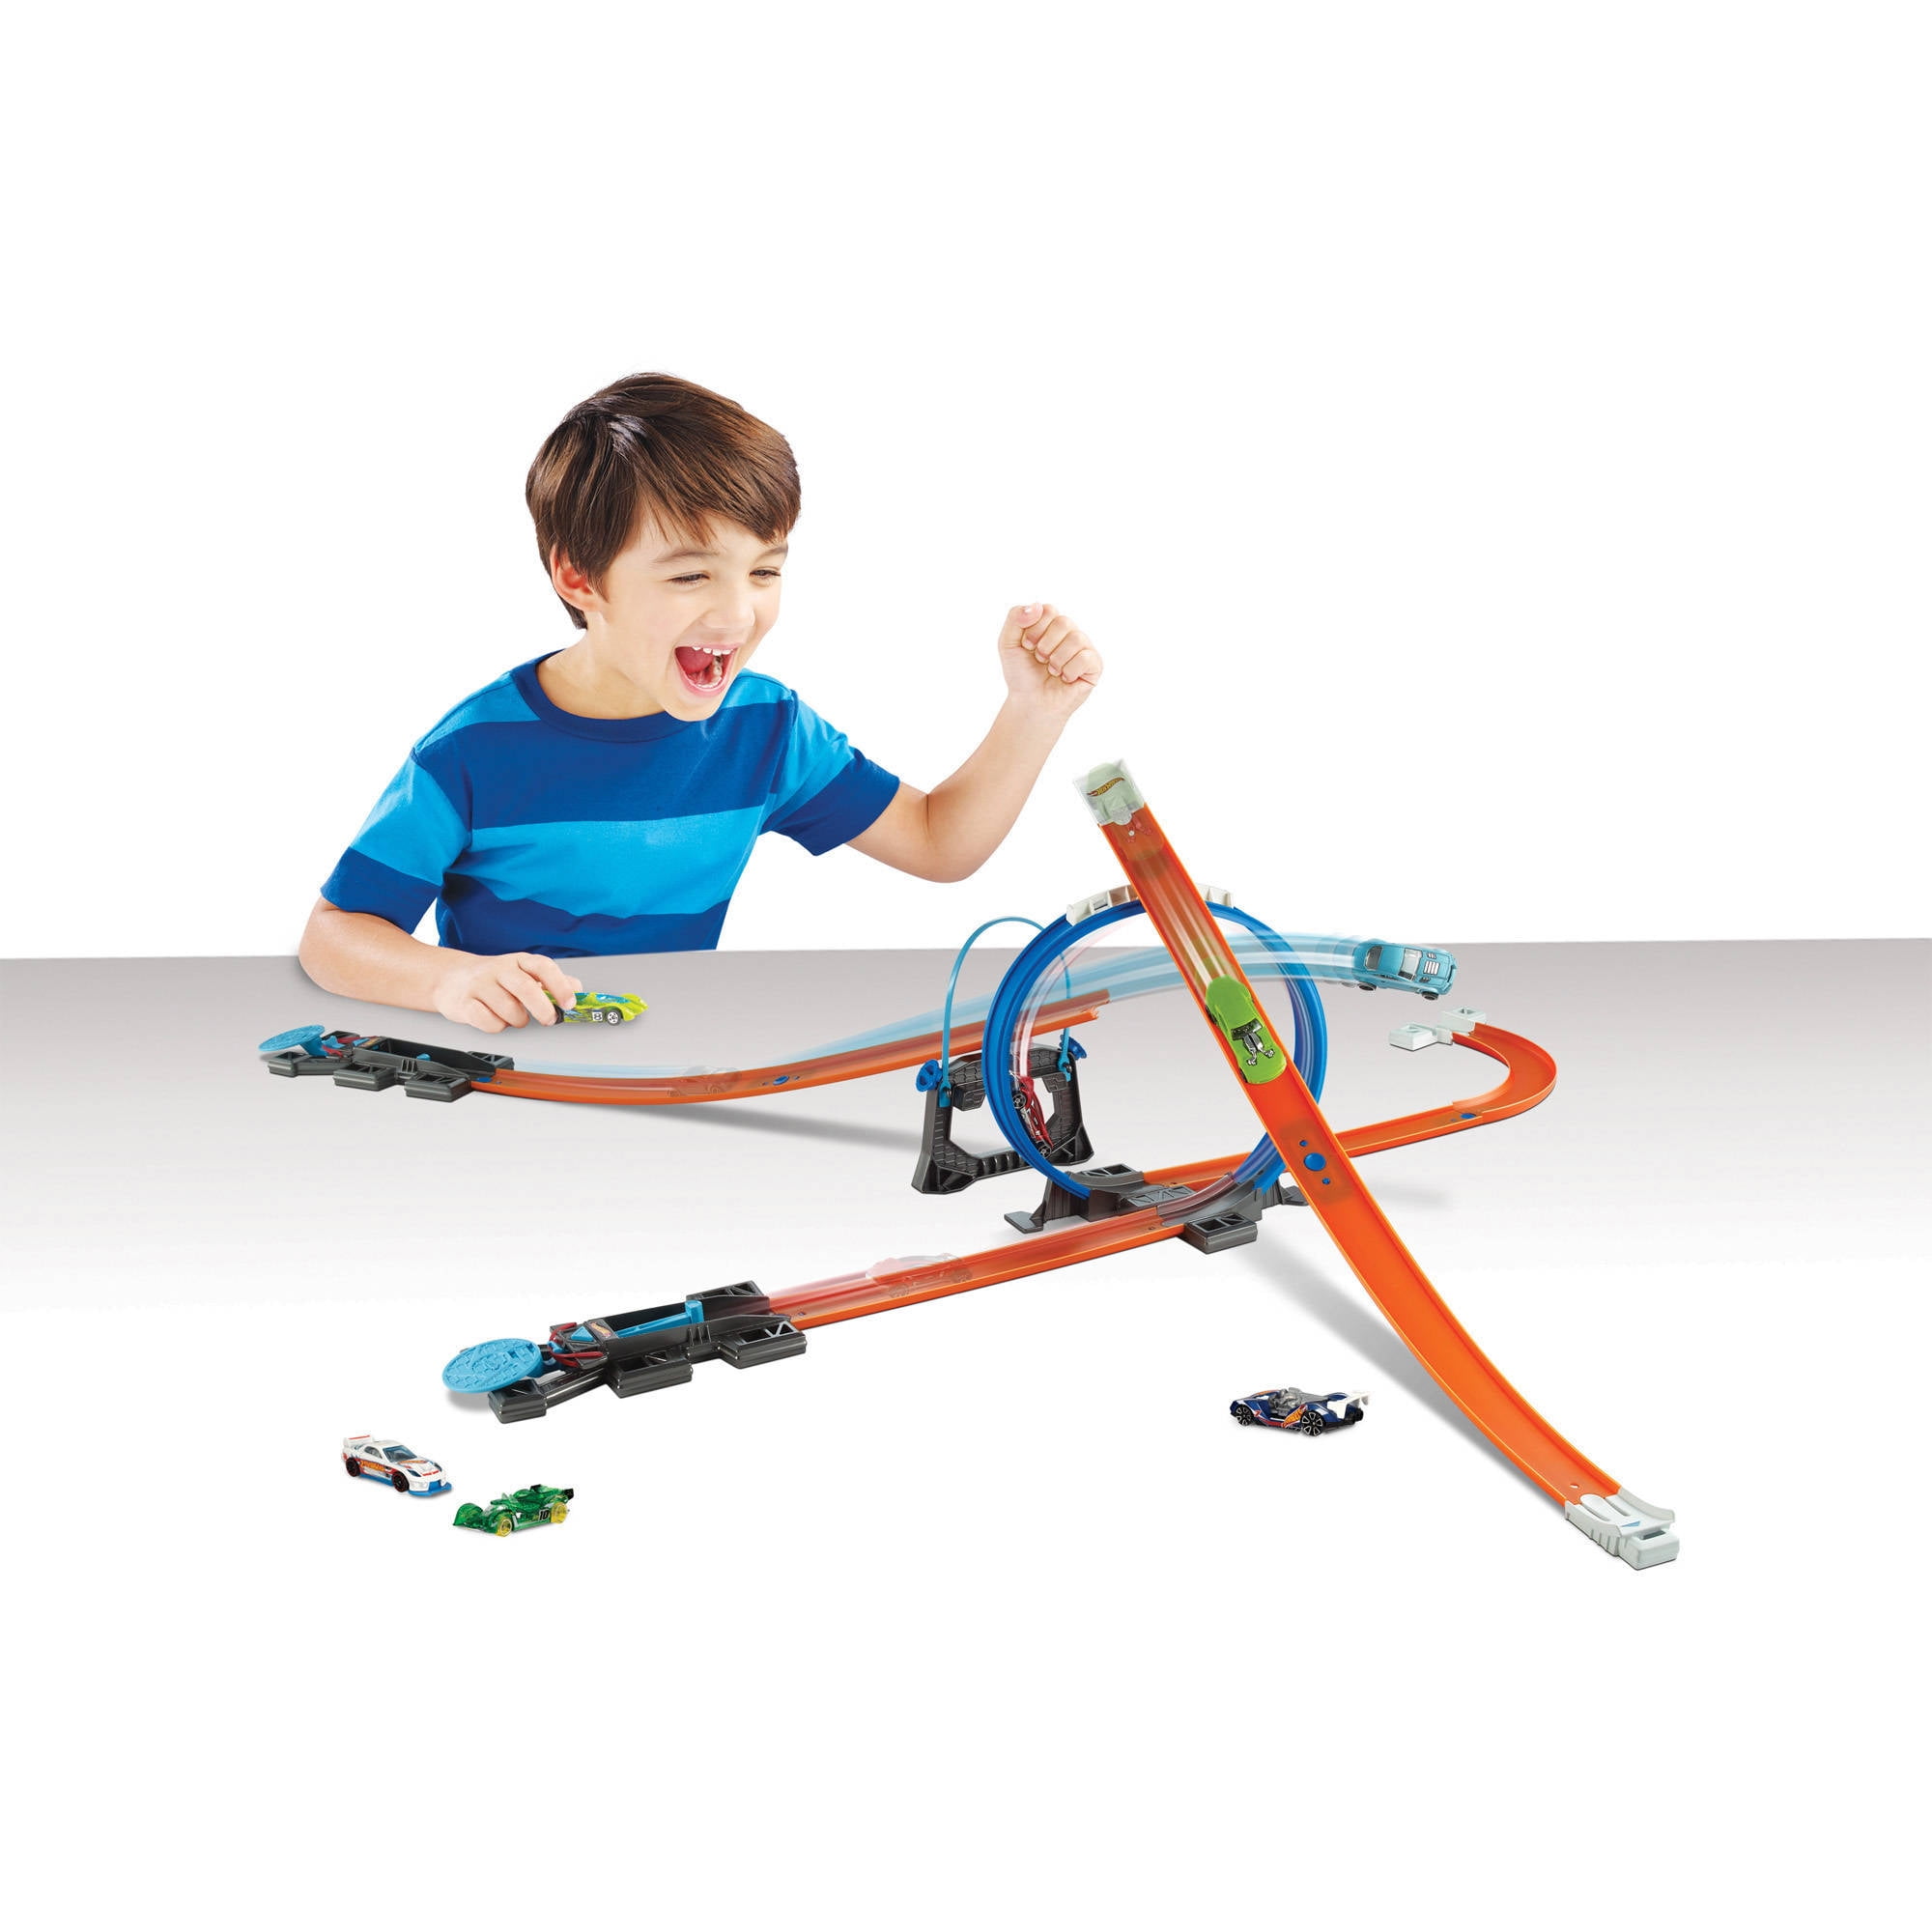 Hot Wheels Track Set Builder Loops W/ Booster Cars Racetrack Toys Kids Play Game 